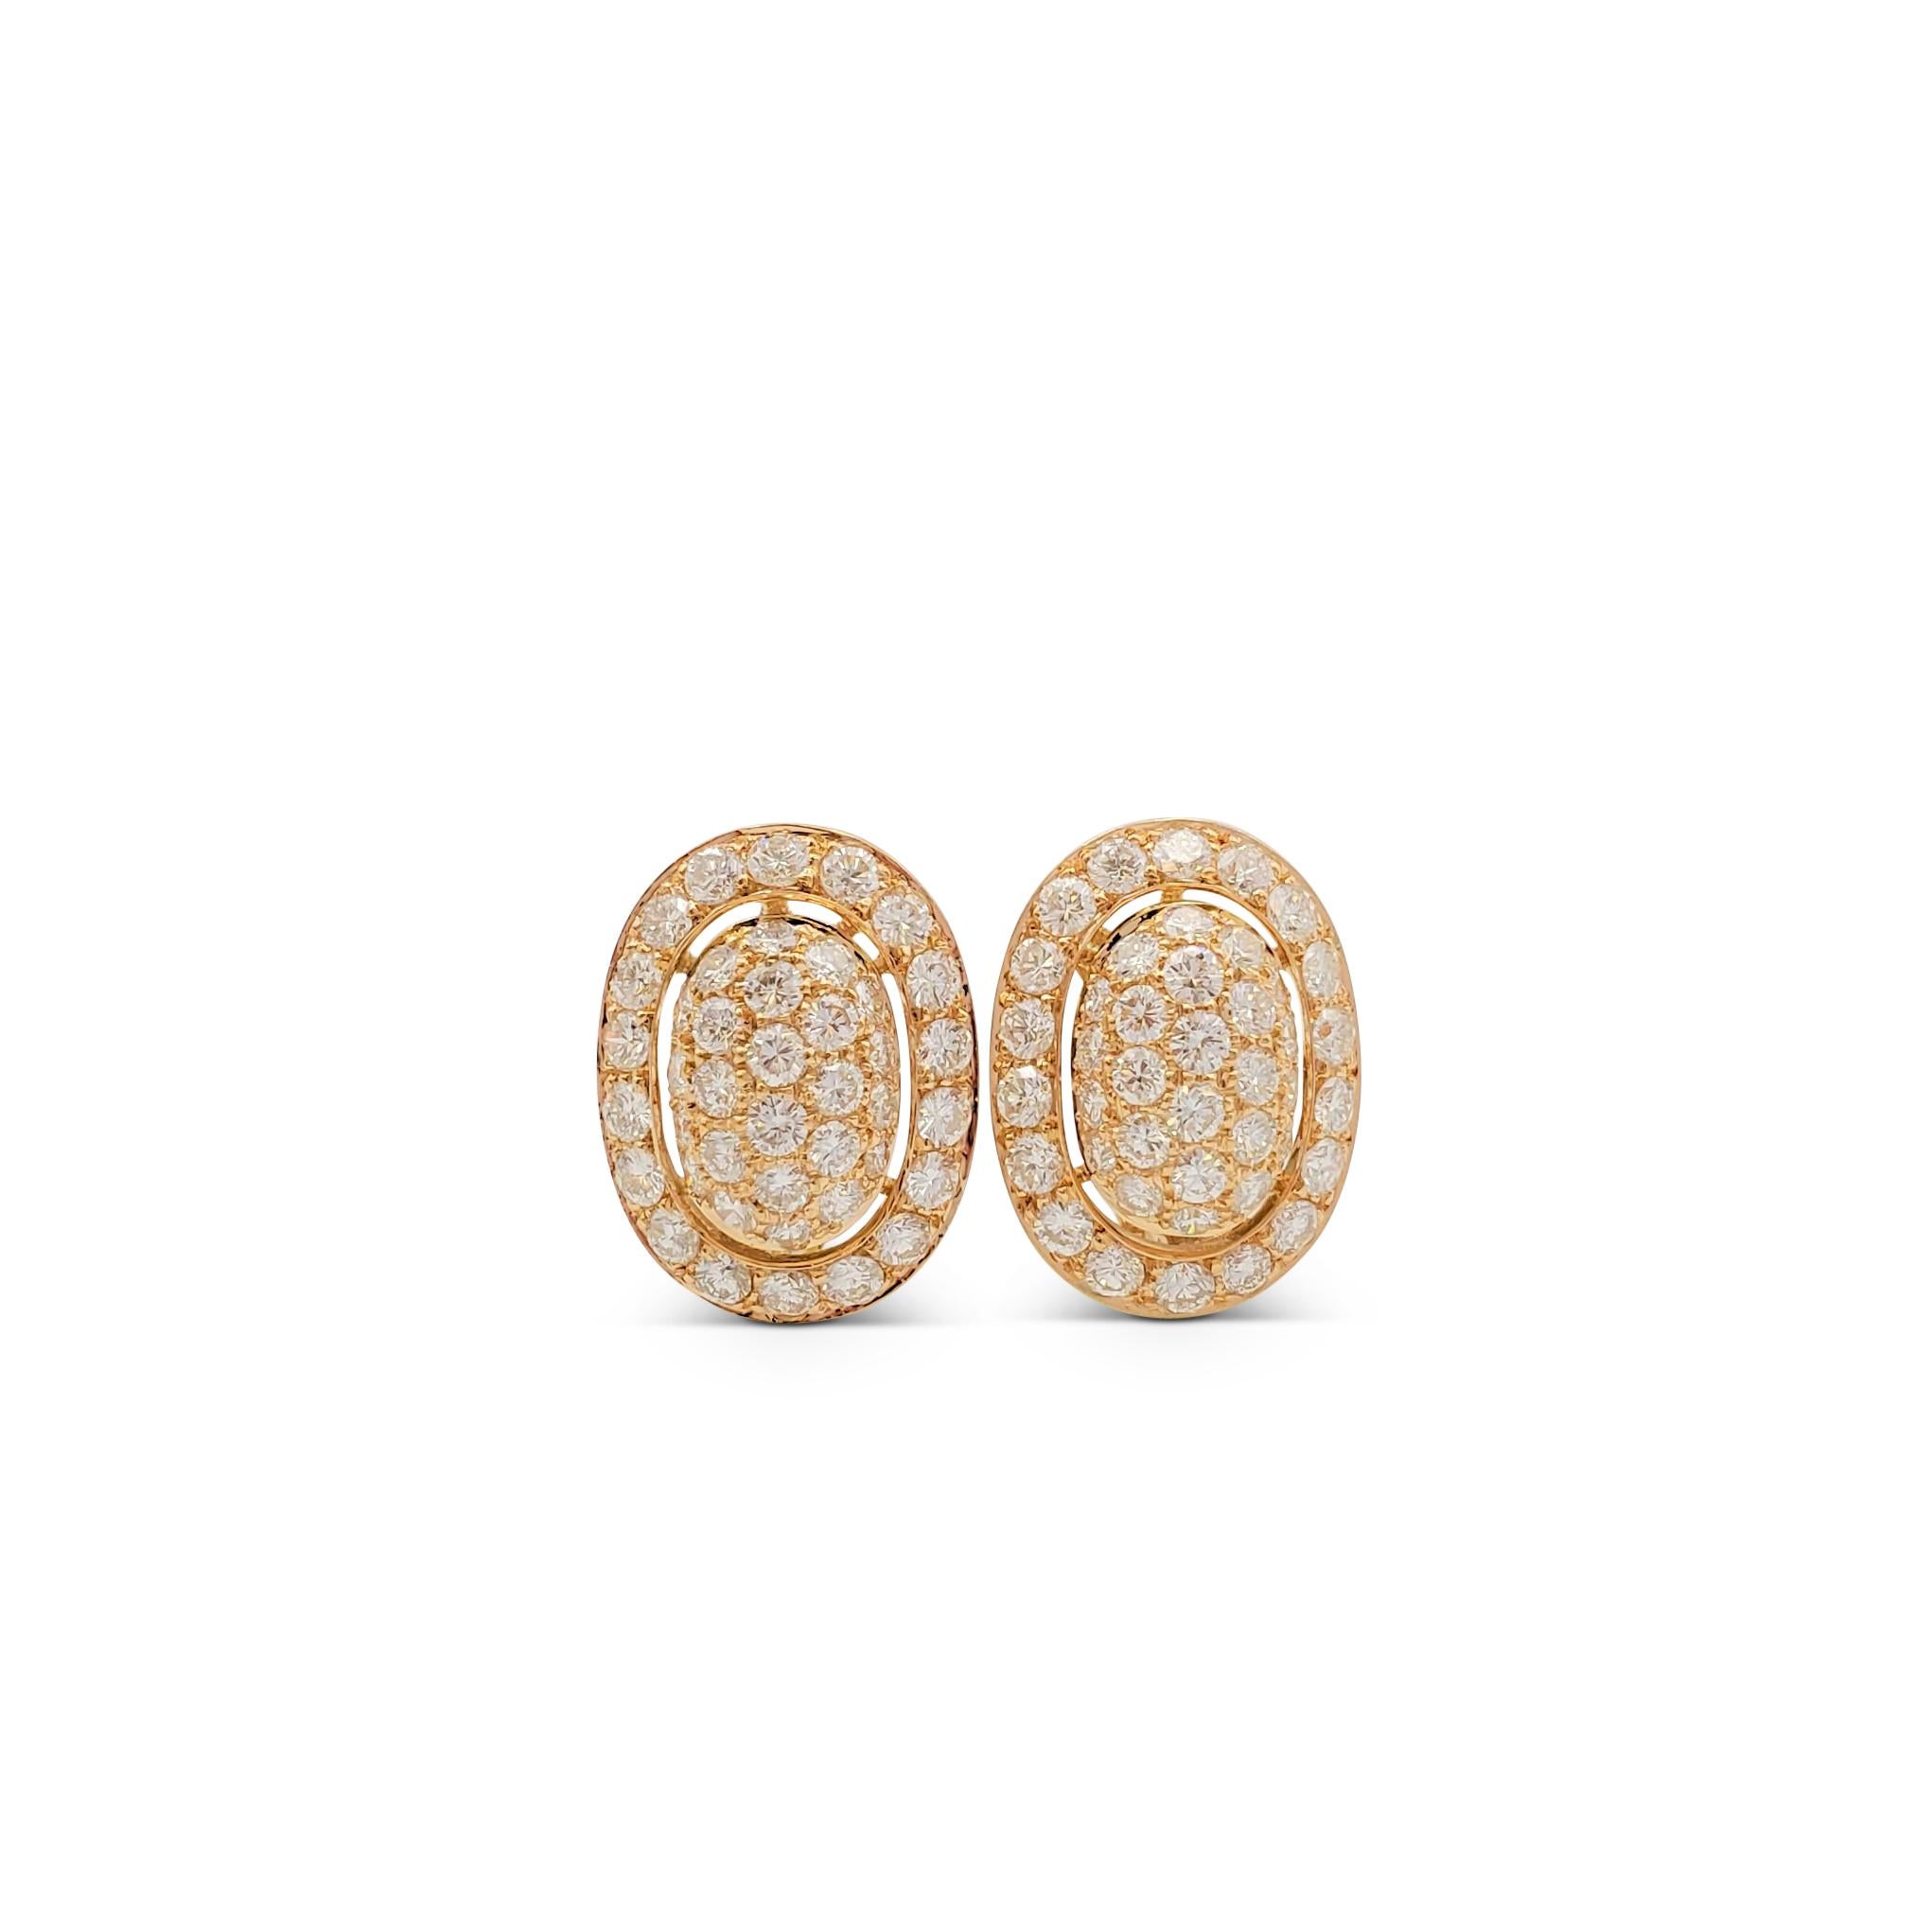 Authentic elegant Cartier Paris clip-on earrings crafted in 18 karat yellow gold with an estimated 3.00 carats of sparkling pavé set round brilliant cut diamonds (E-F, VS). Signed Cartier Paris, 750, with serial number and hallmarks. The earrings